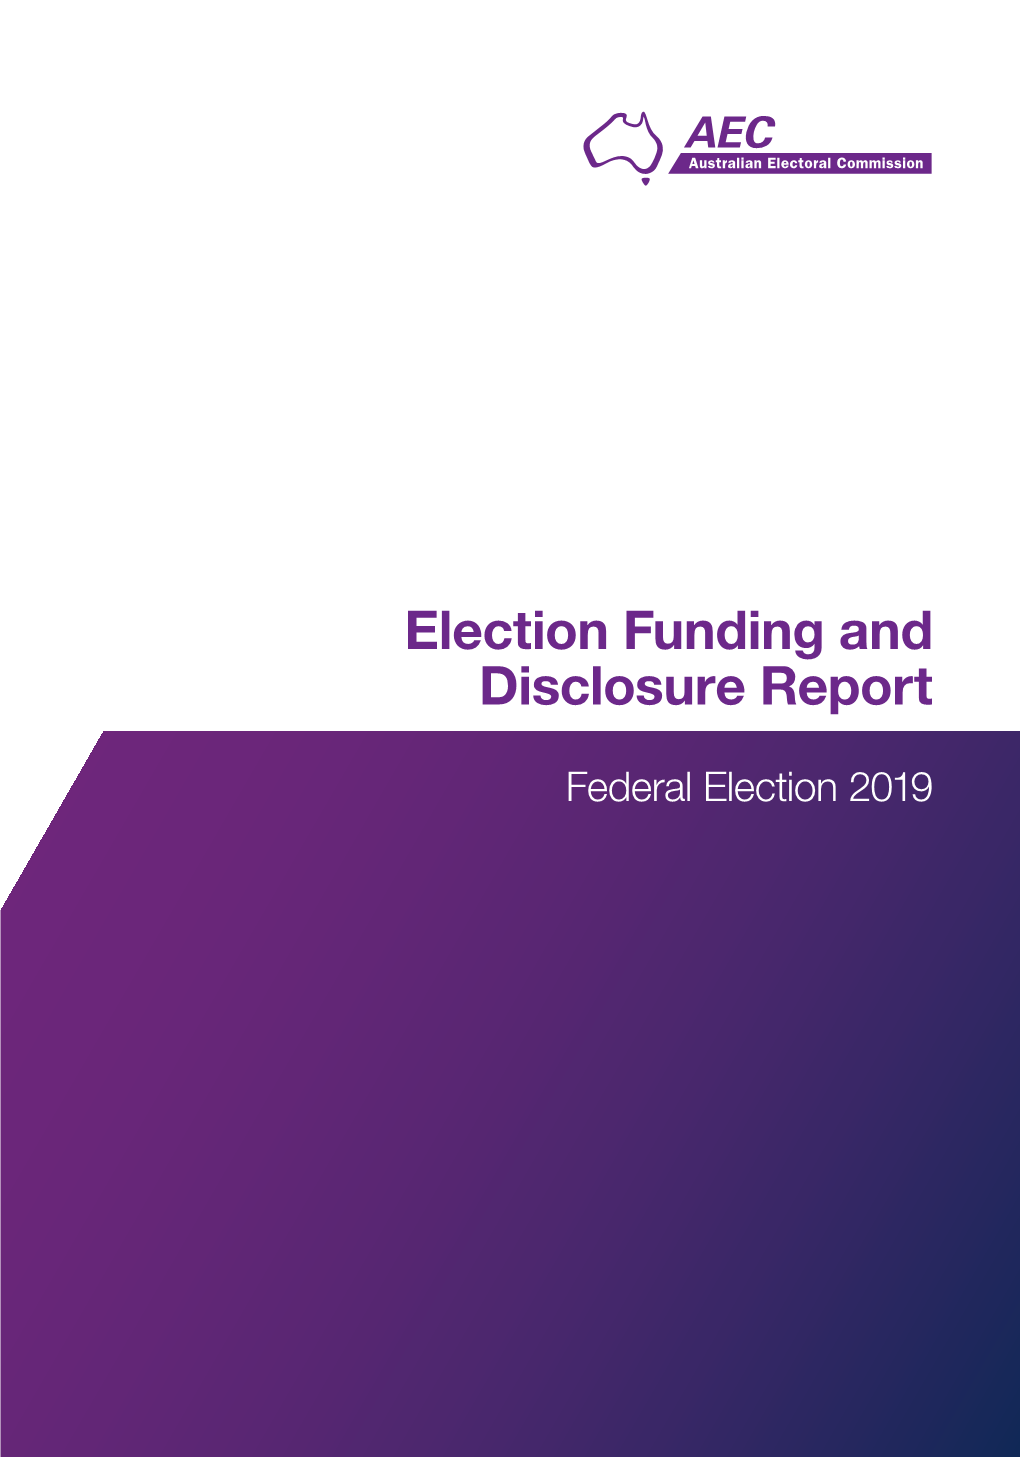 Election Funding and Disclosure Report 2019 Federal Election